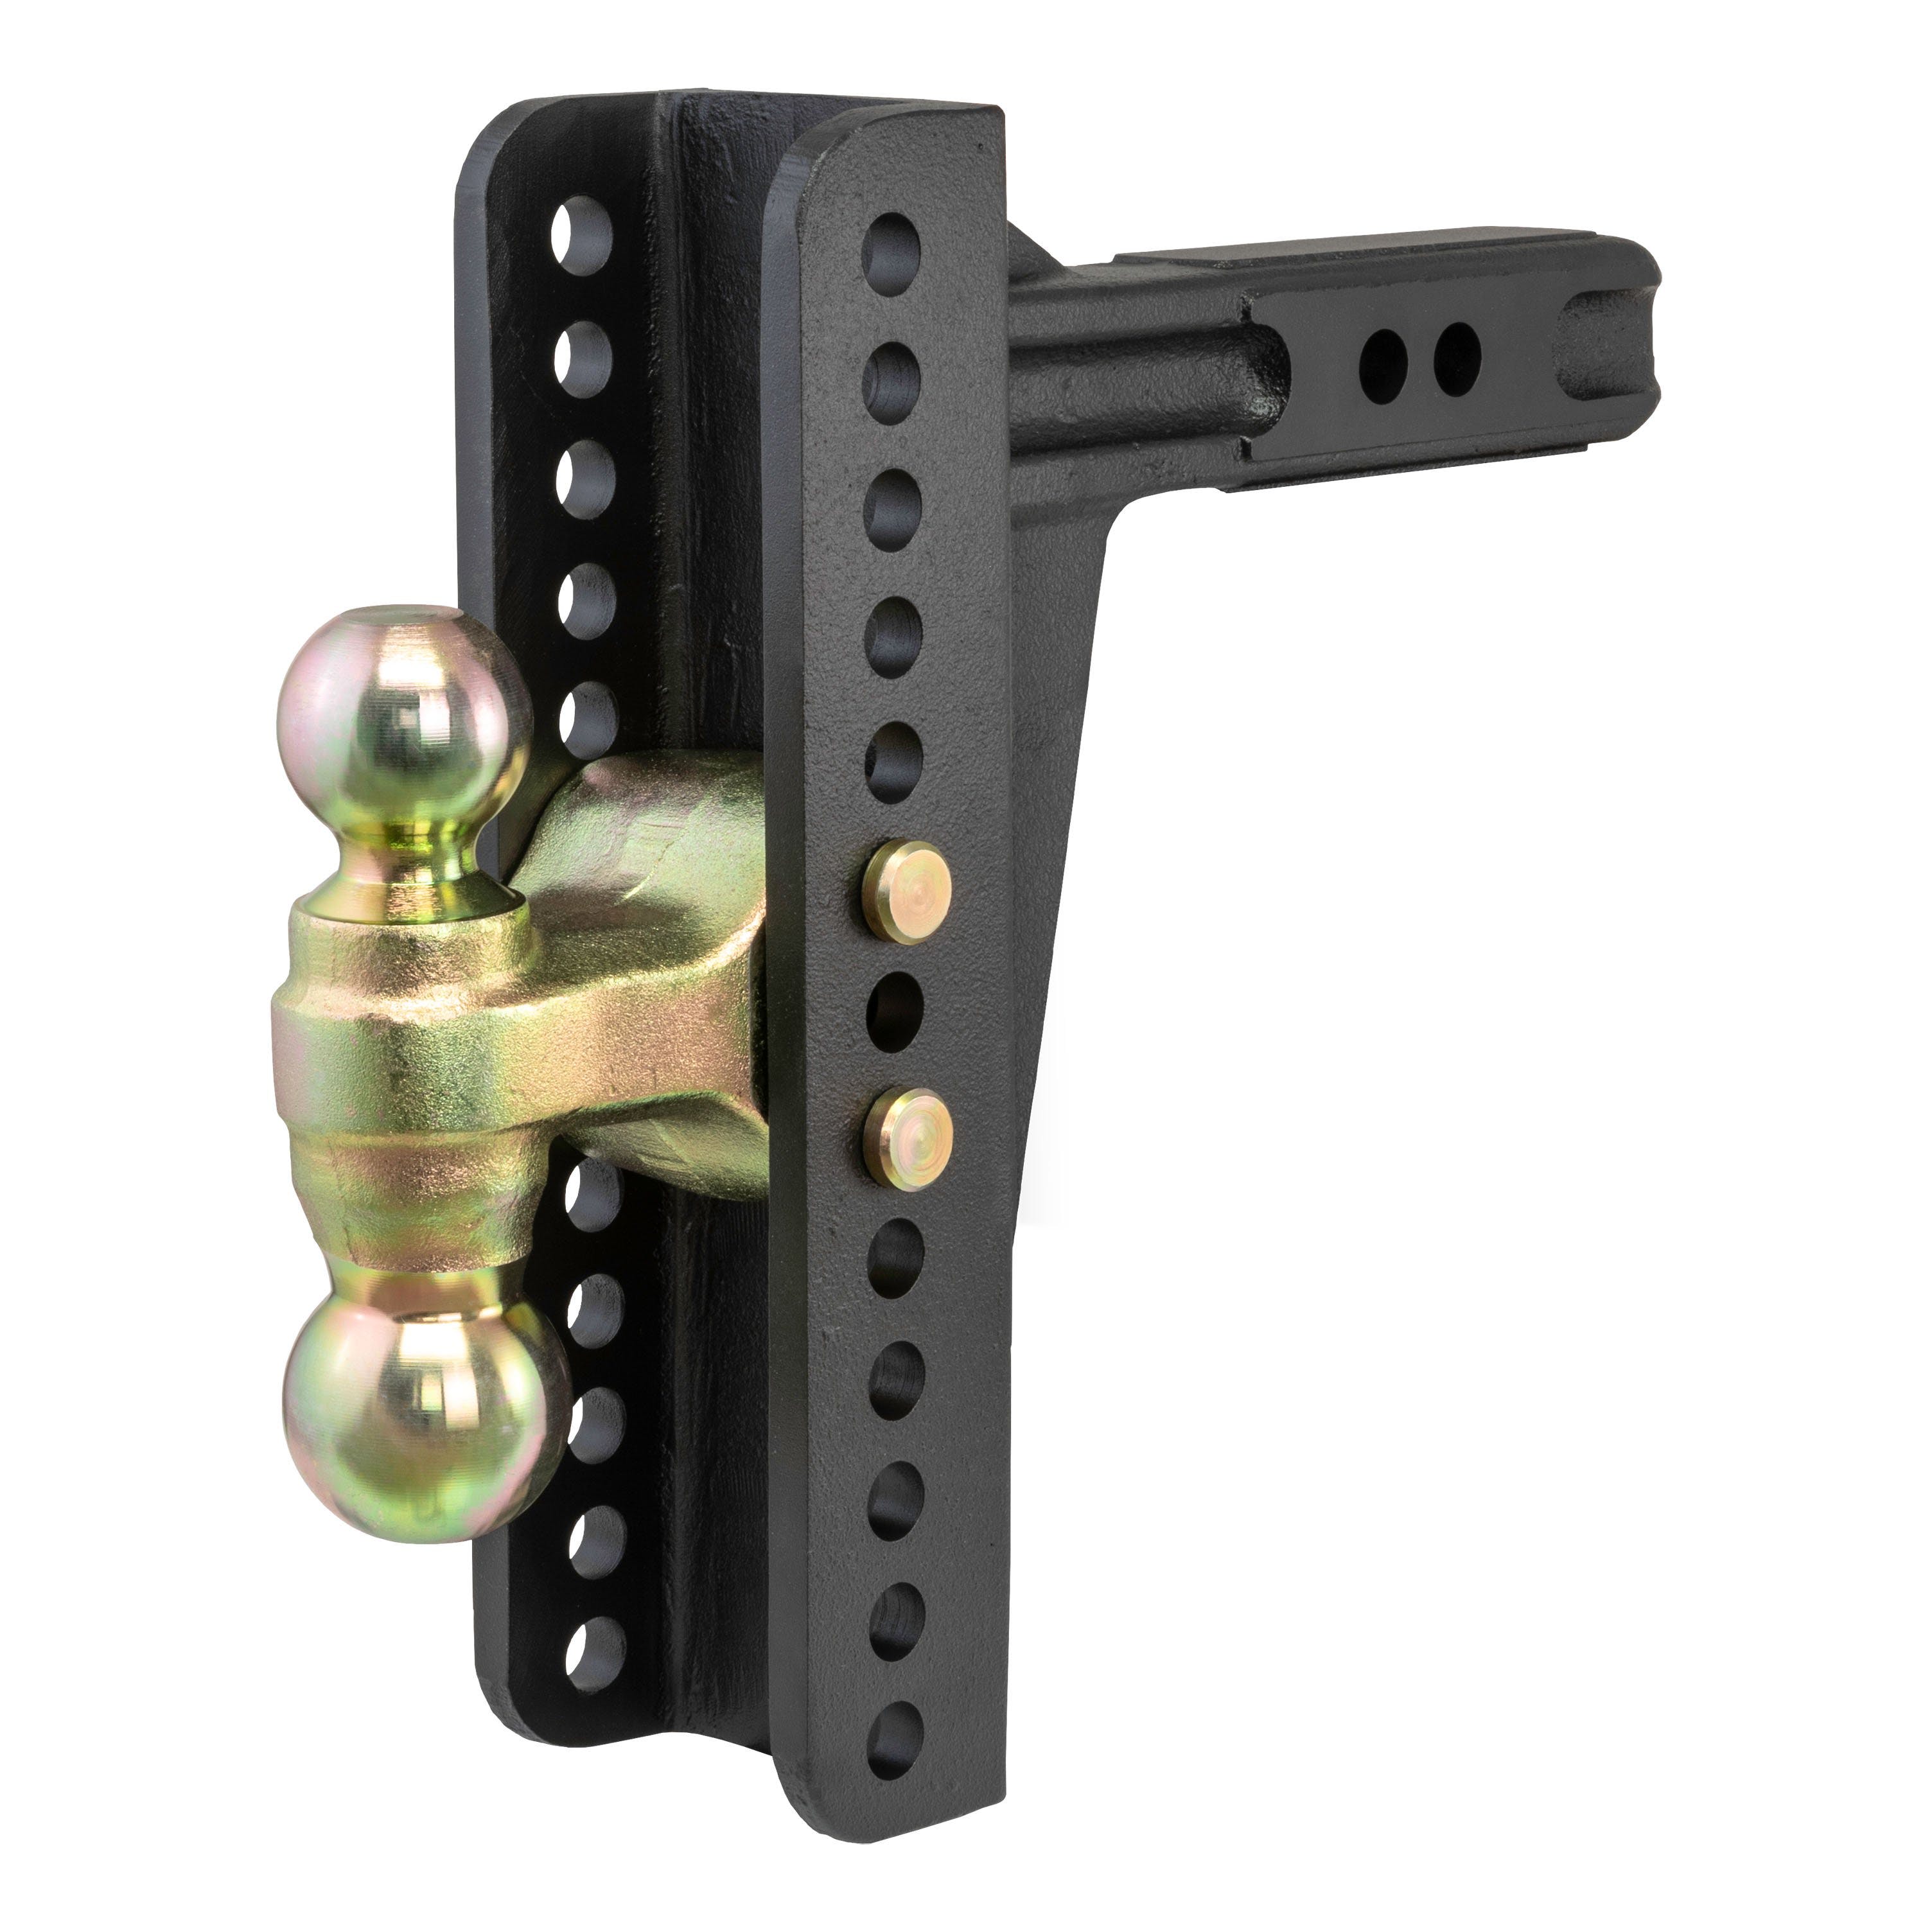 CURT 45926 Adjustable Channel Mount with Dual Ball (2 Shank, 14,000 lbs., 10-1/8 Drop)